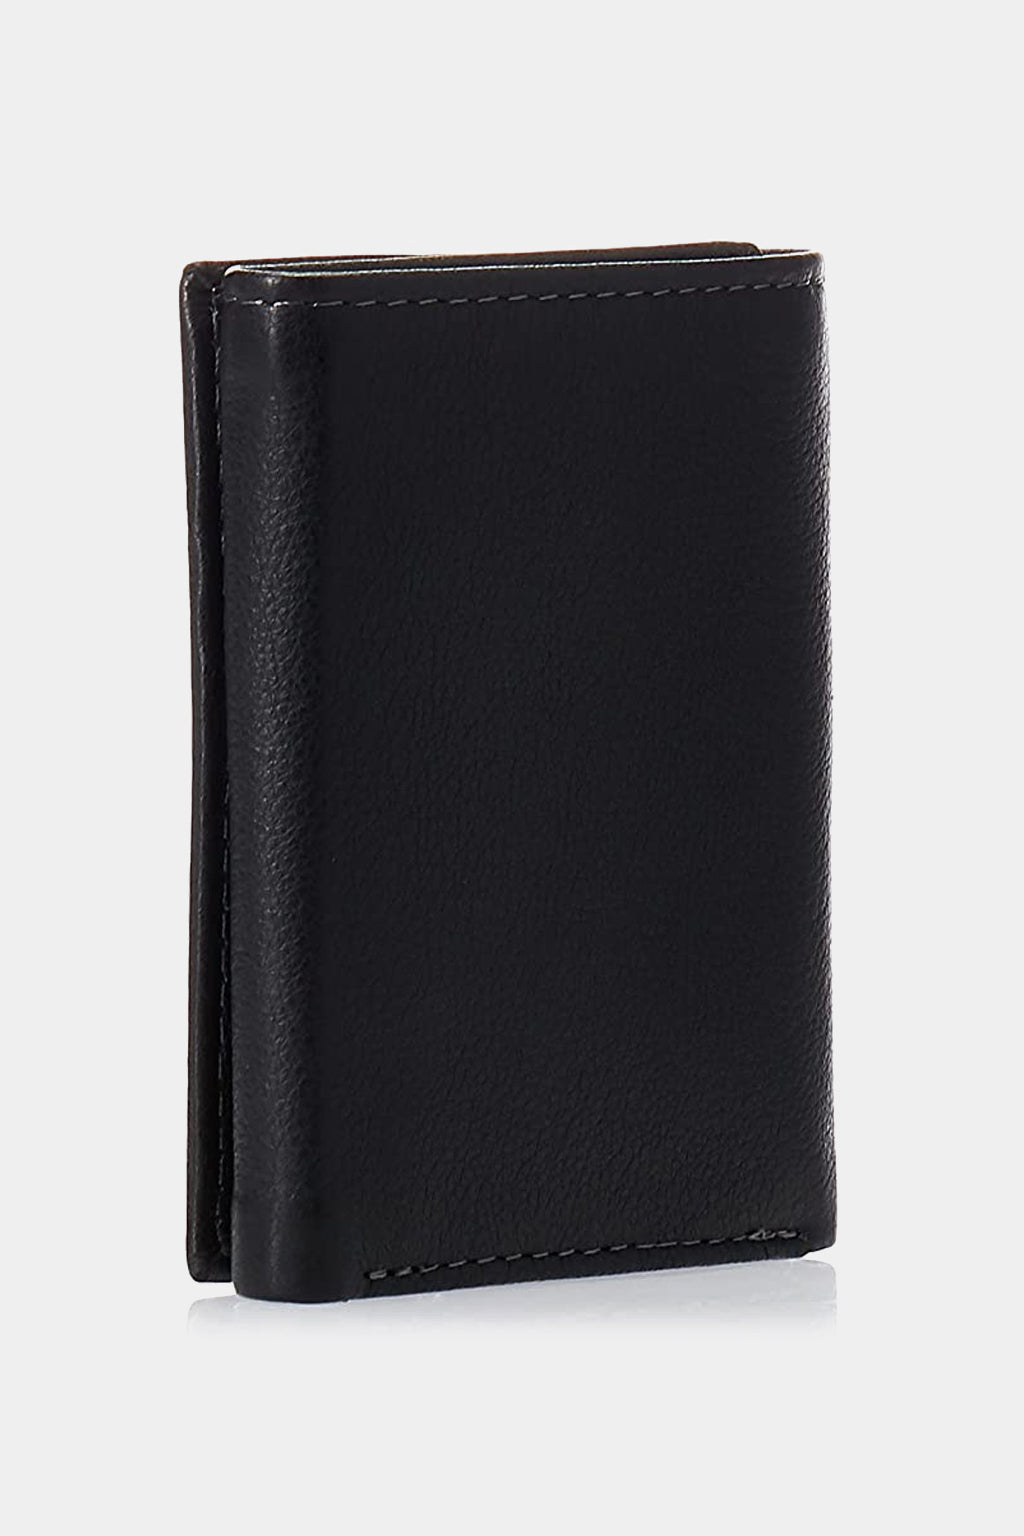 Timberland - Trifold Wallet